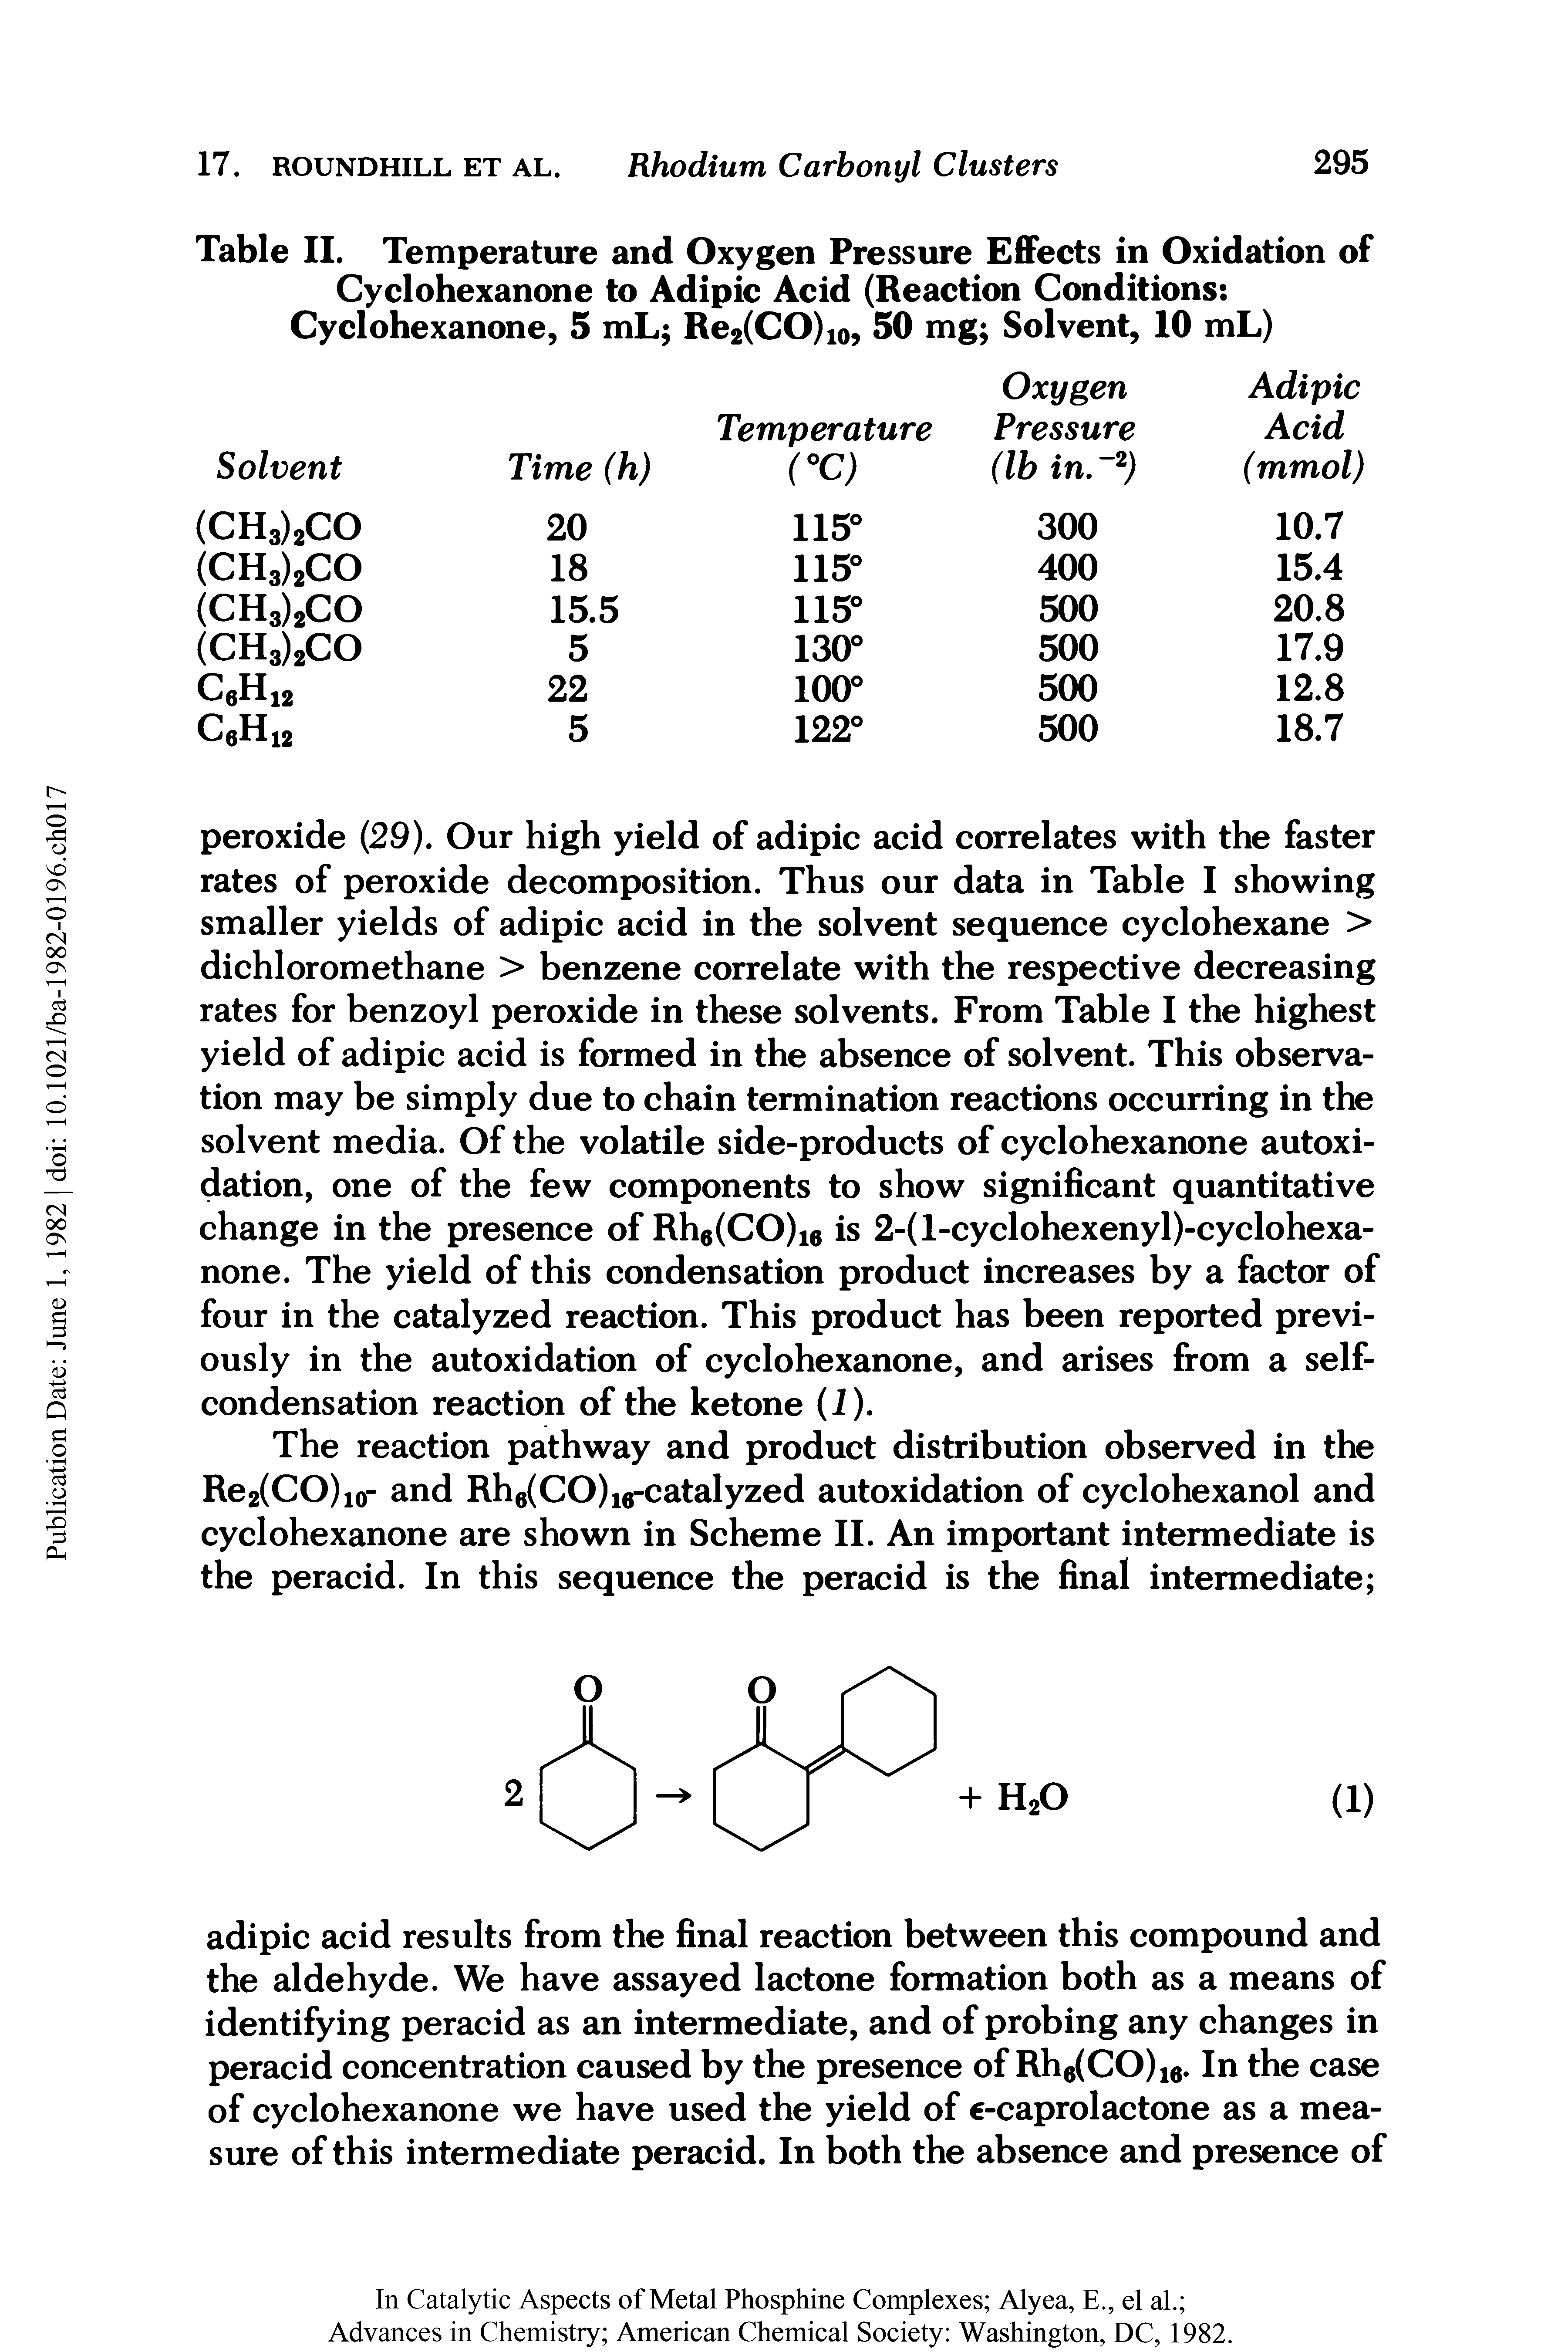 Table II. Temperature and Oxygen Pressure Effects in Oxidation of Cyclohexanone to Adipic Acid (Reaction Conditions Cyclohexanone, 5 mL Re2(CO)10, 50 mg Solvent, 10 mL)...